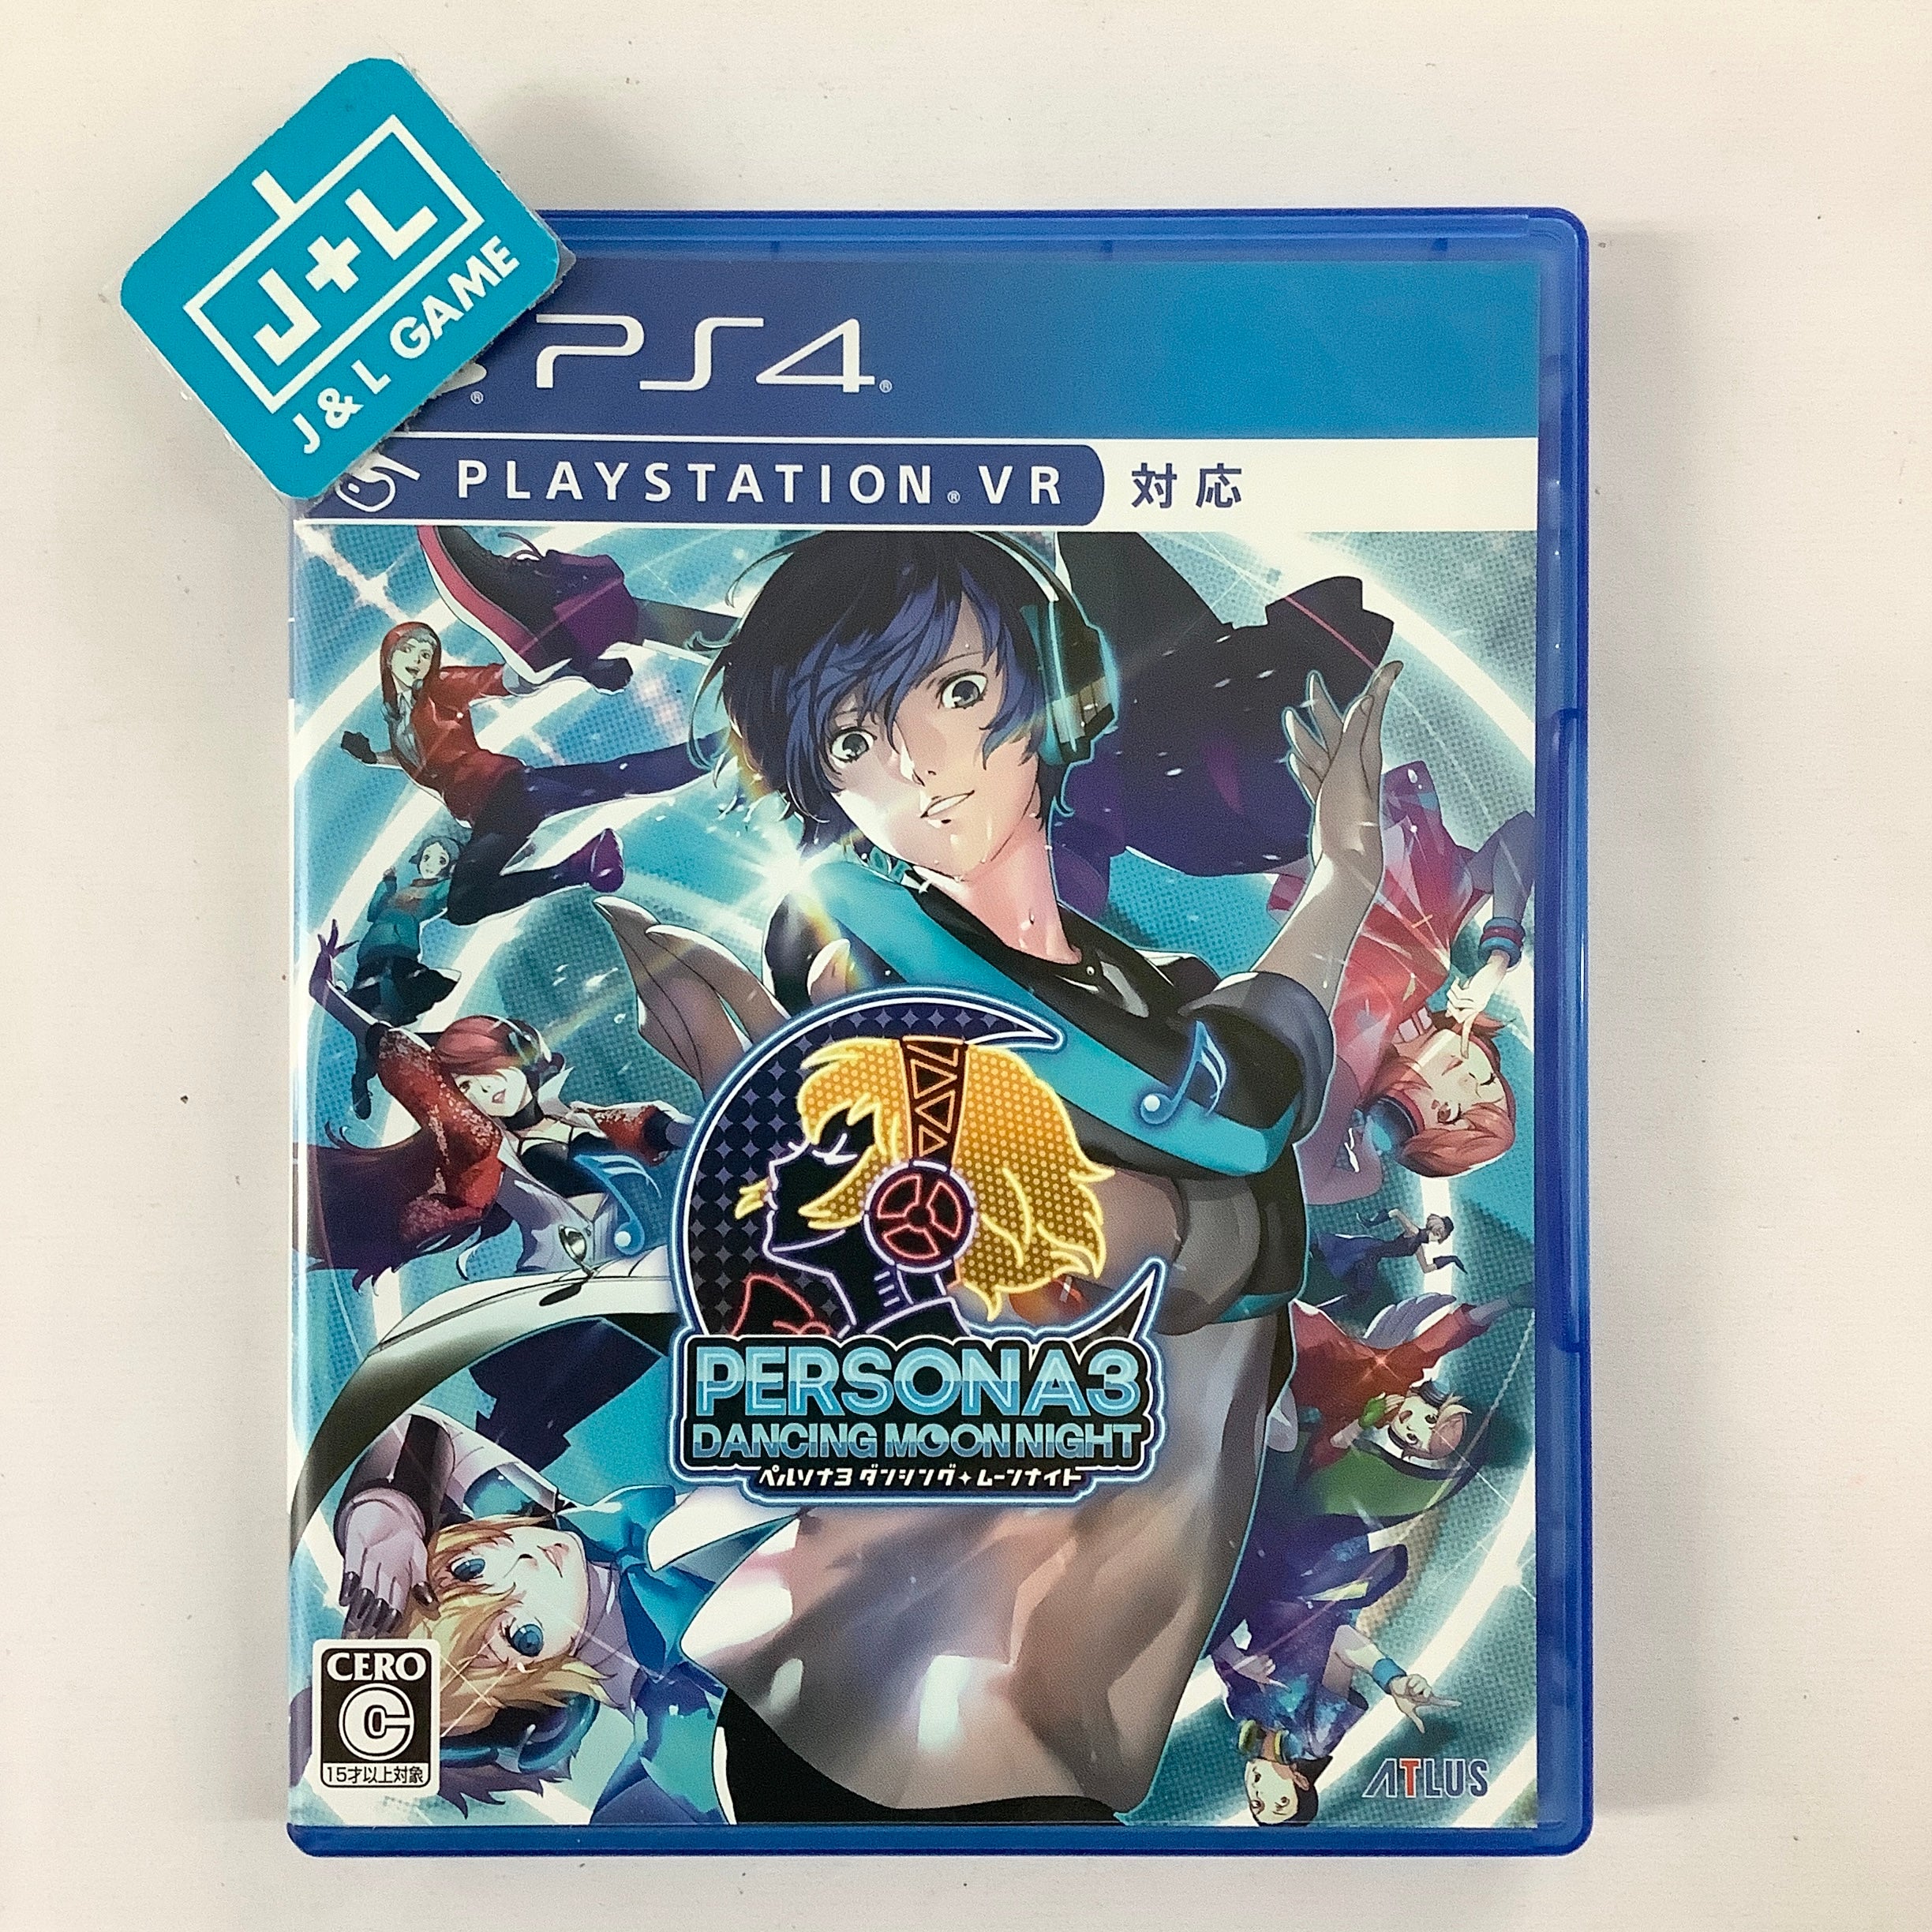 Persona 3: Dancing Moon Night - (PS4) PlayStation 4 [Pre-Owned] (Japanese Import) Video Games Atlus   